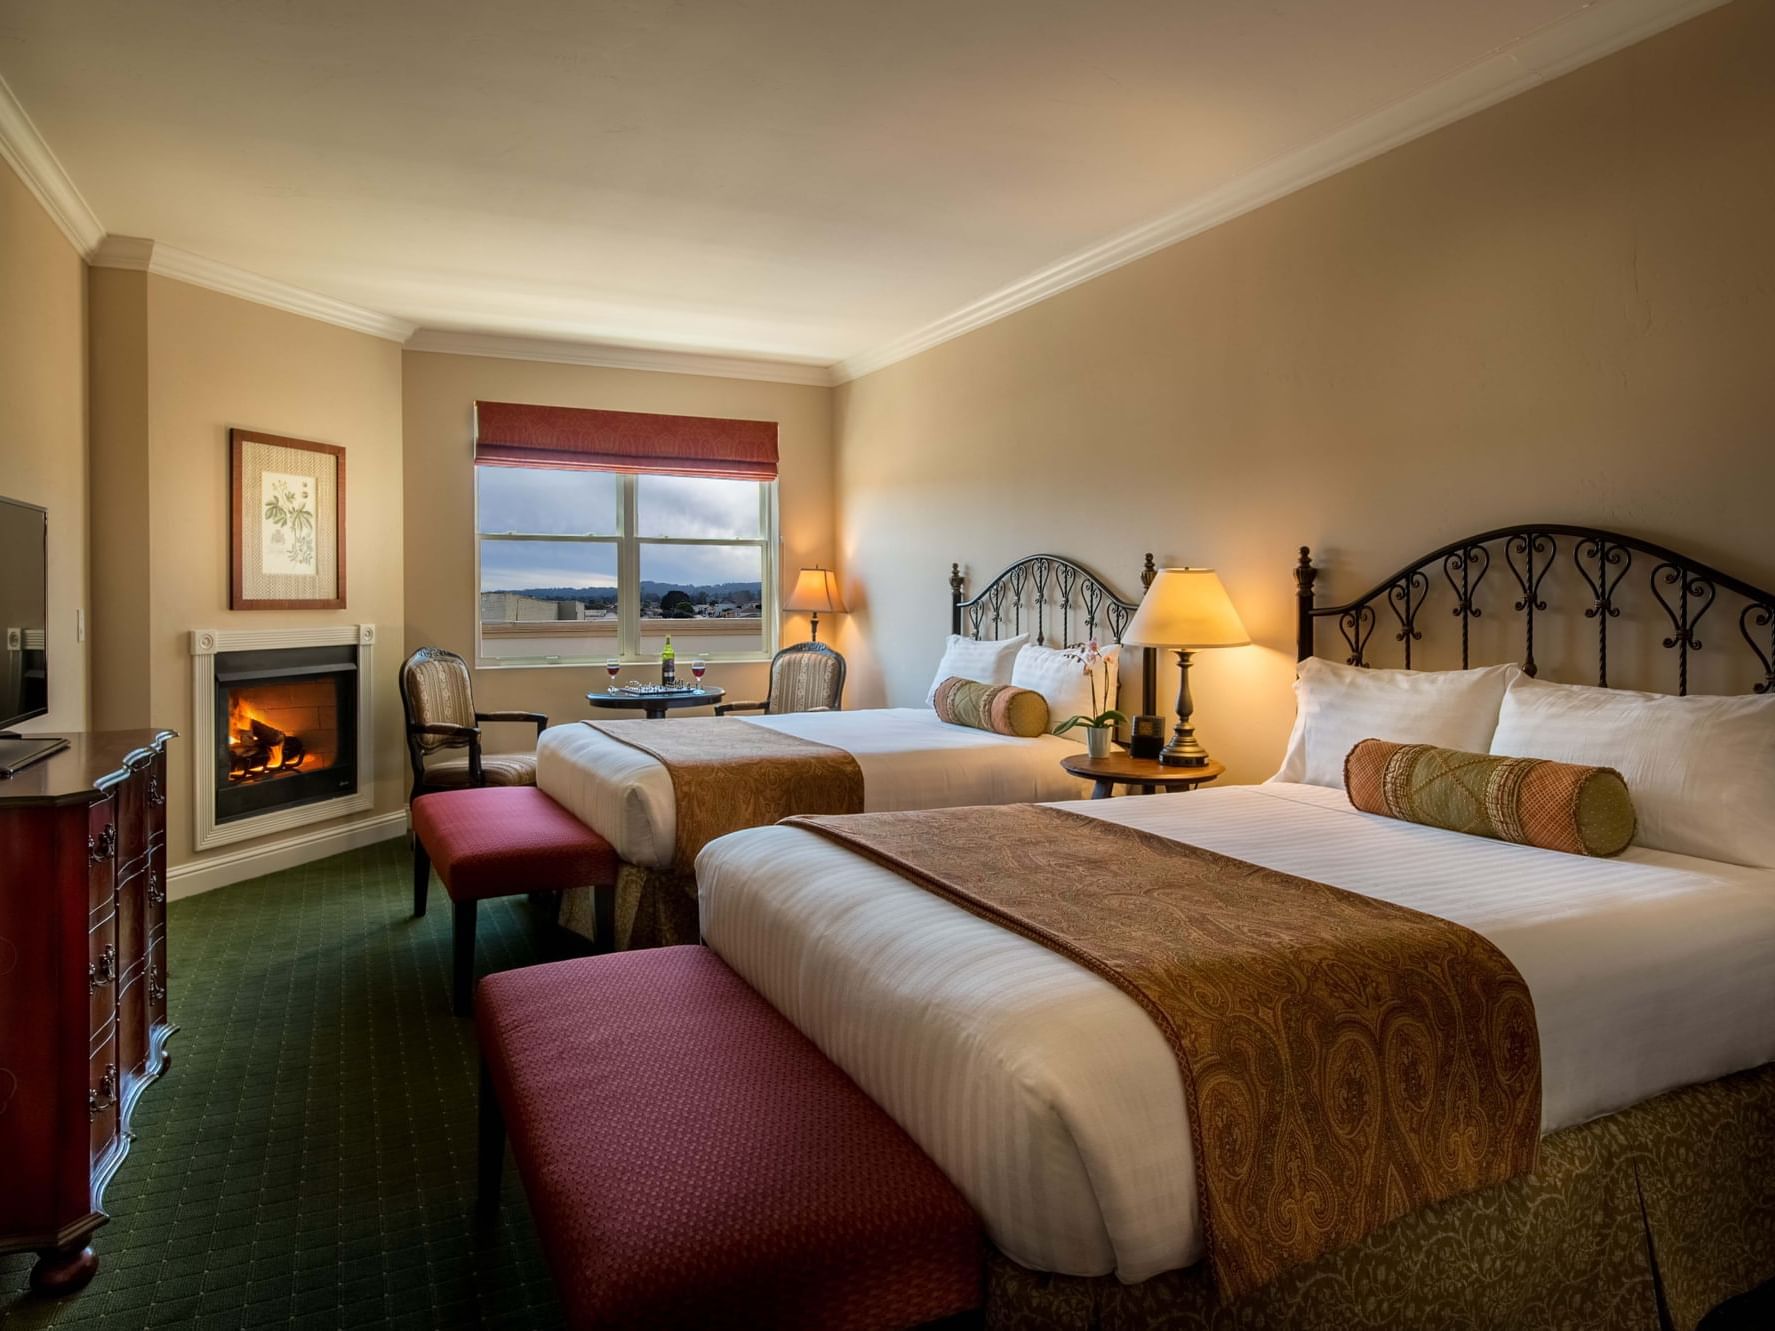 Deluxe queen room with two beds and a fireplace